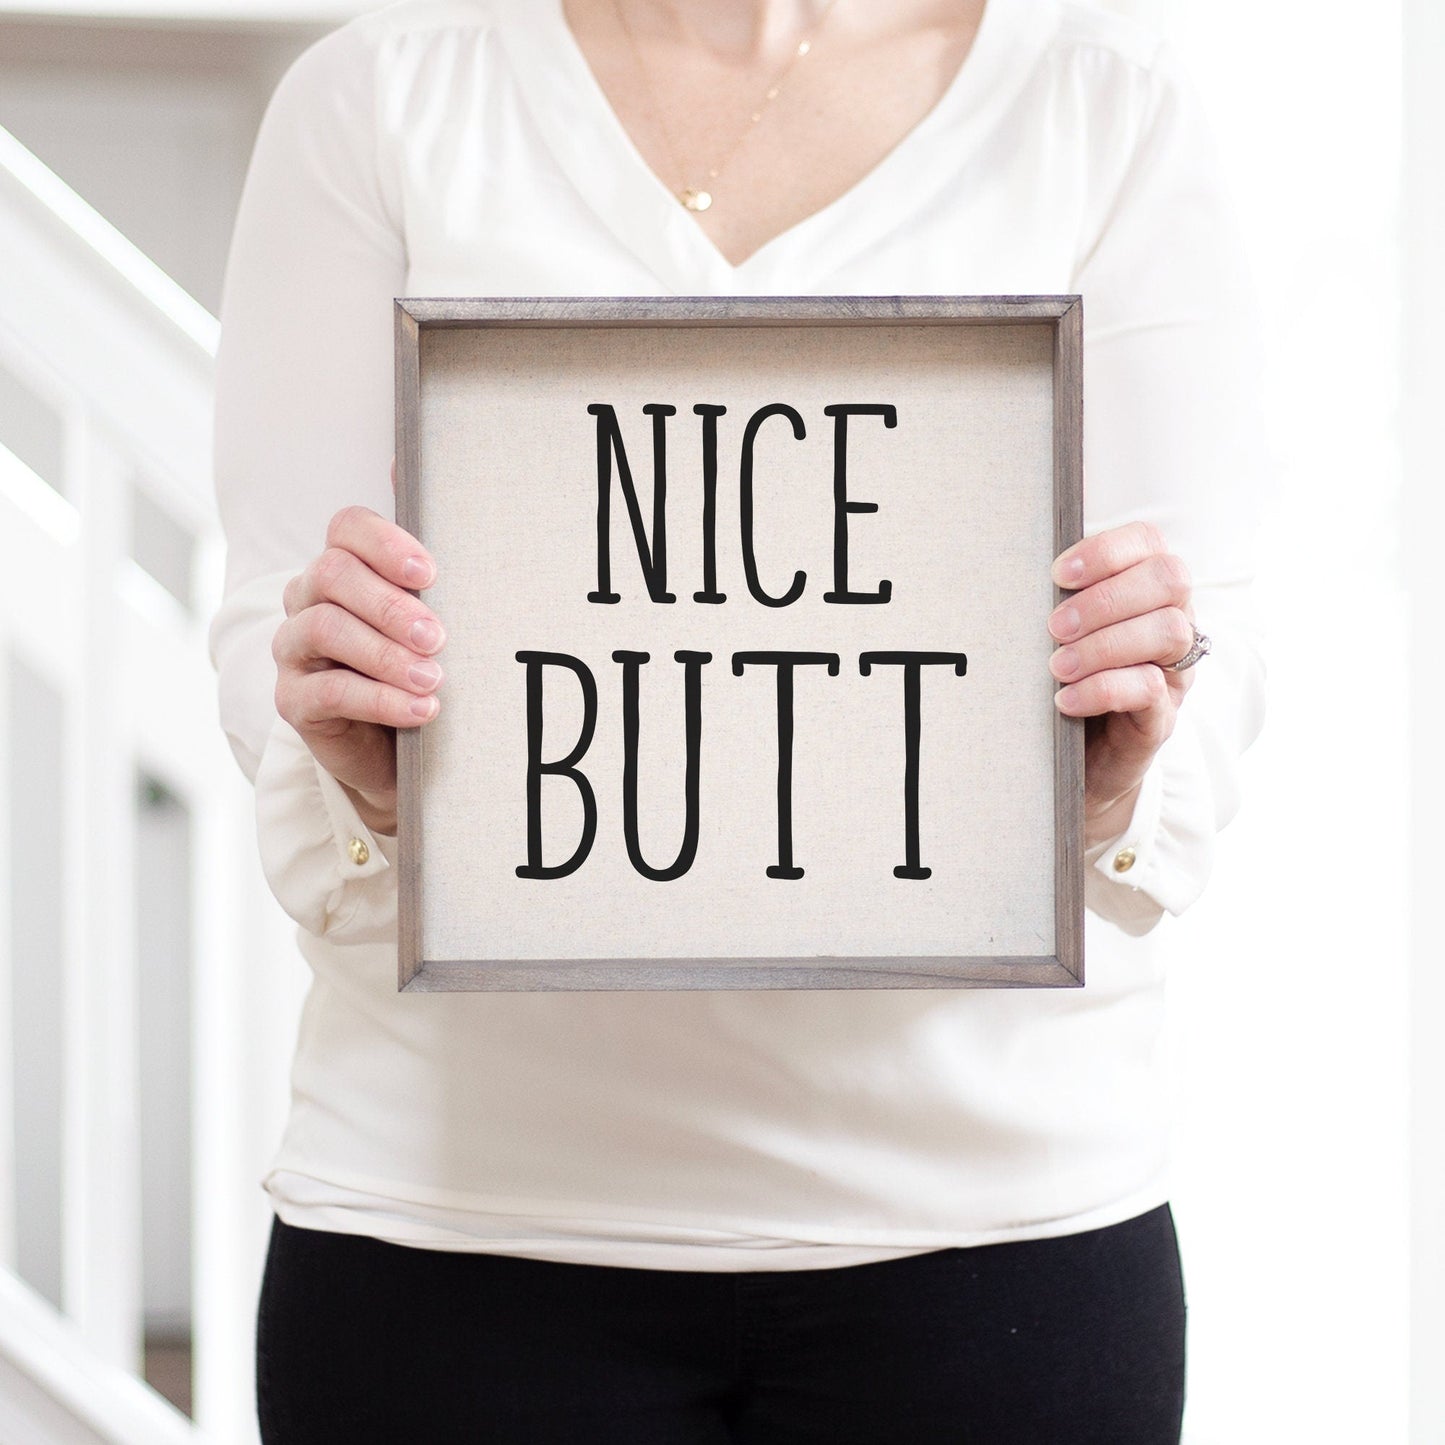 Load image into Gallery viewer, Nice Butt Bathroom Sign Bathroom Humor | Bathroom Sign Nice Butt | Bathroom Farmhouse Decor Farmhouse Sign | Funny Bathroom Shelf Decor
